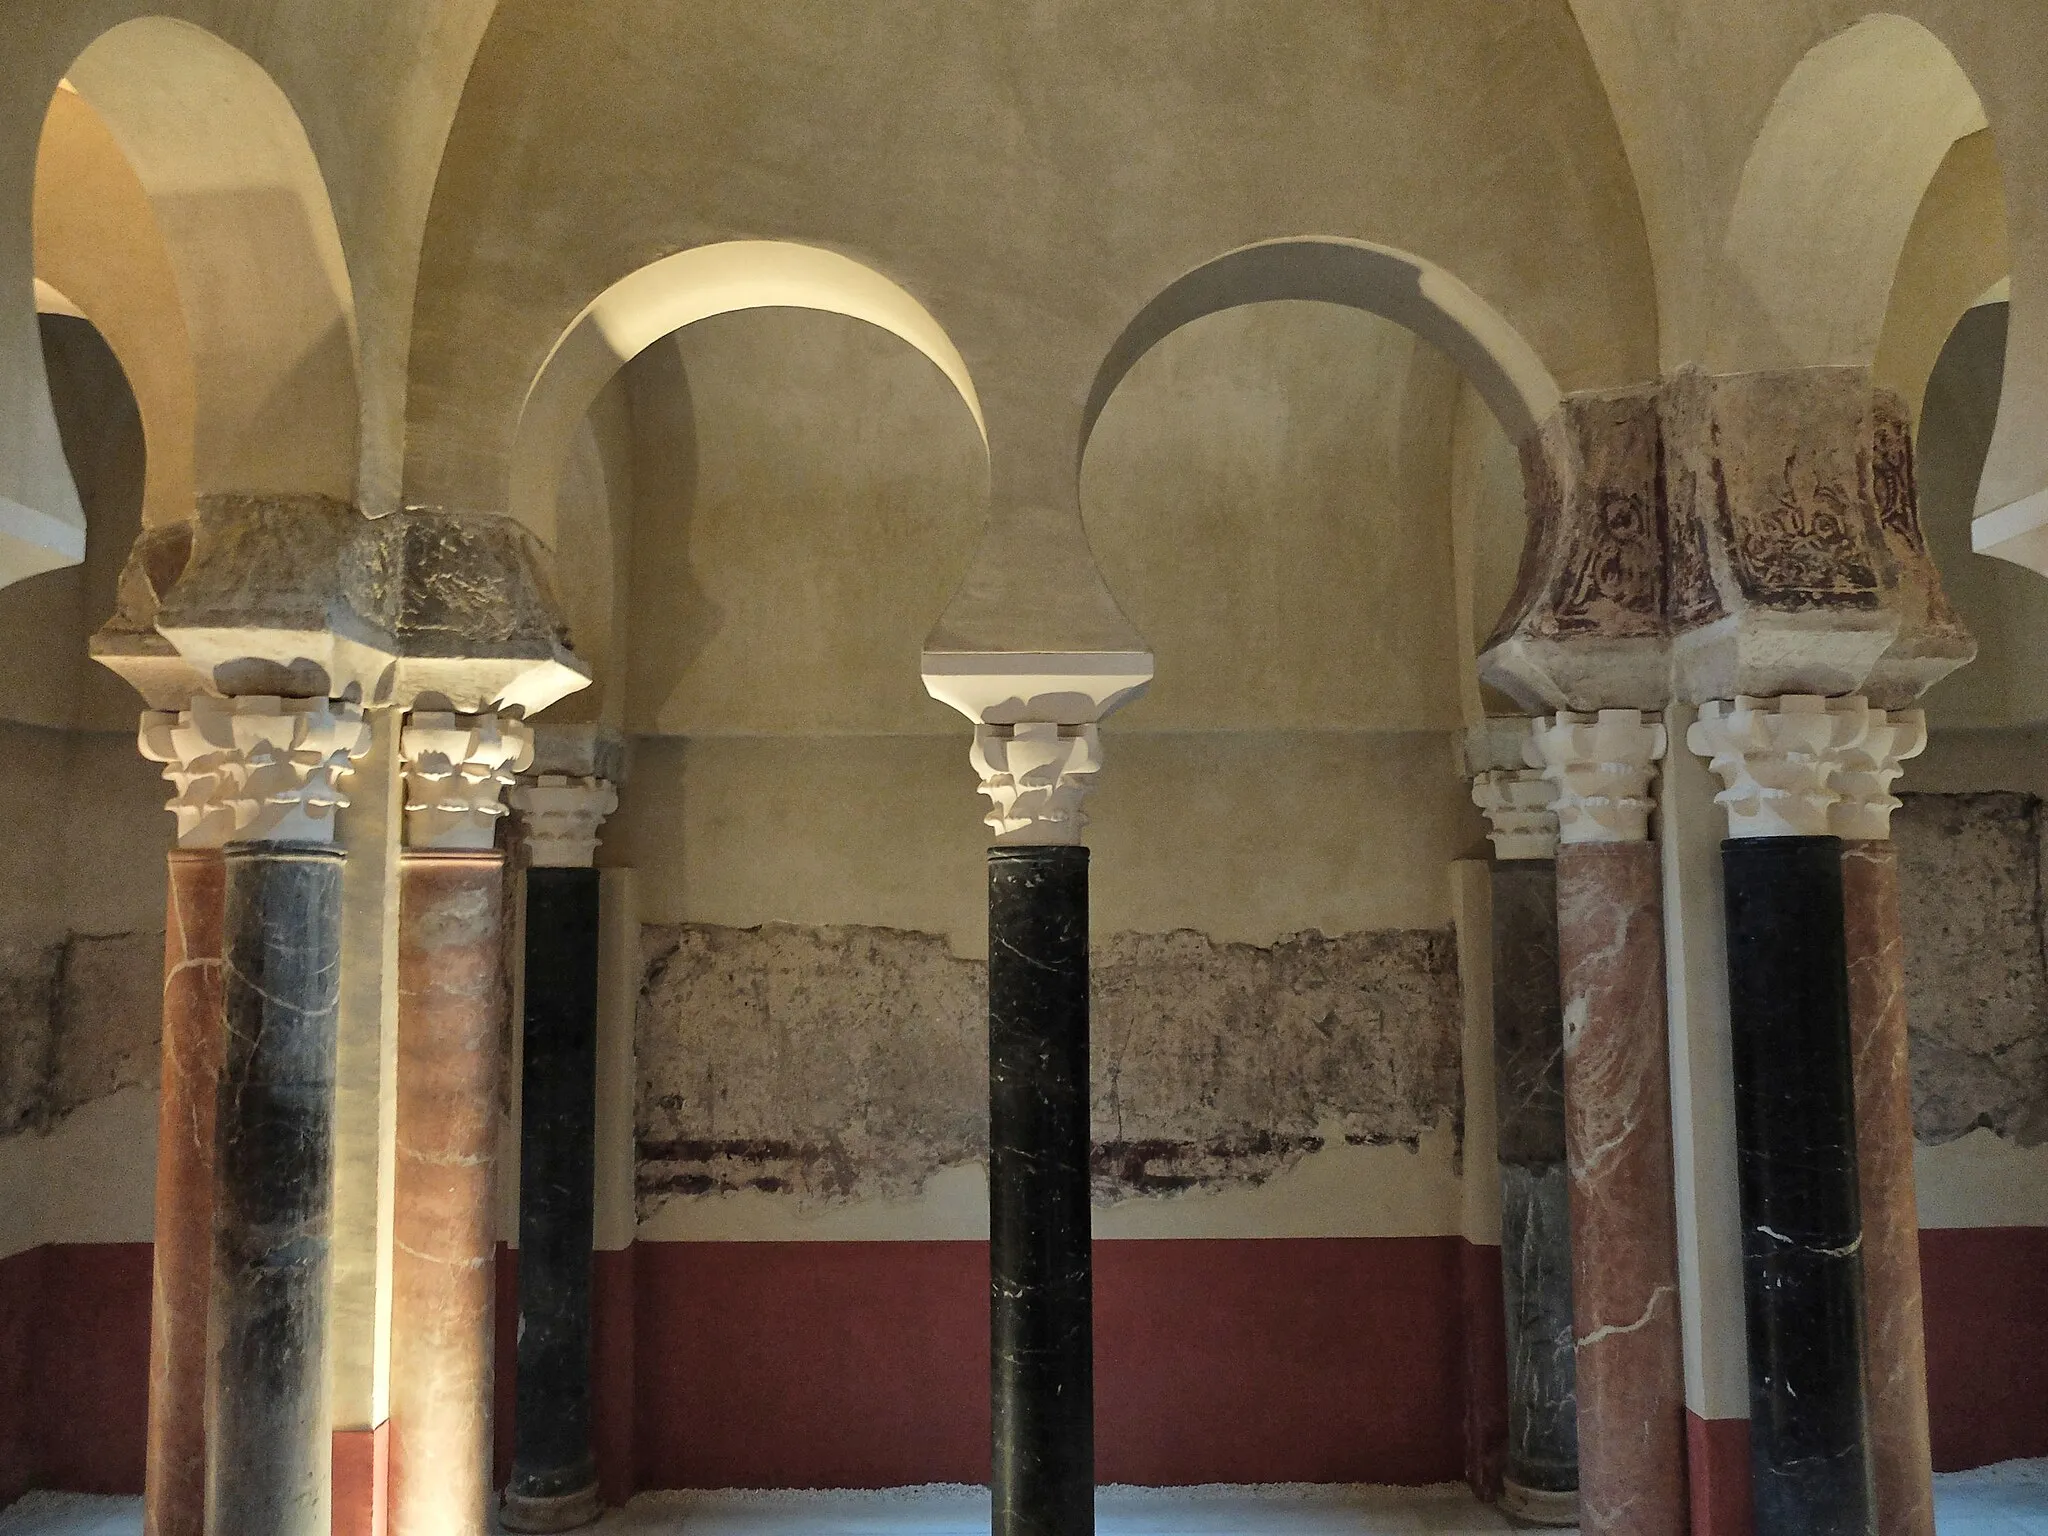 Photo showing: The Baños califales, a reconstructed hammam (bathhouse) complex in Cordoba.
The warm room of the caliphate-era bathhouse of the complex.